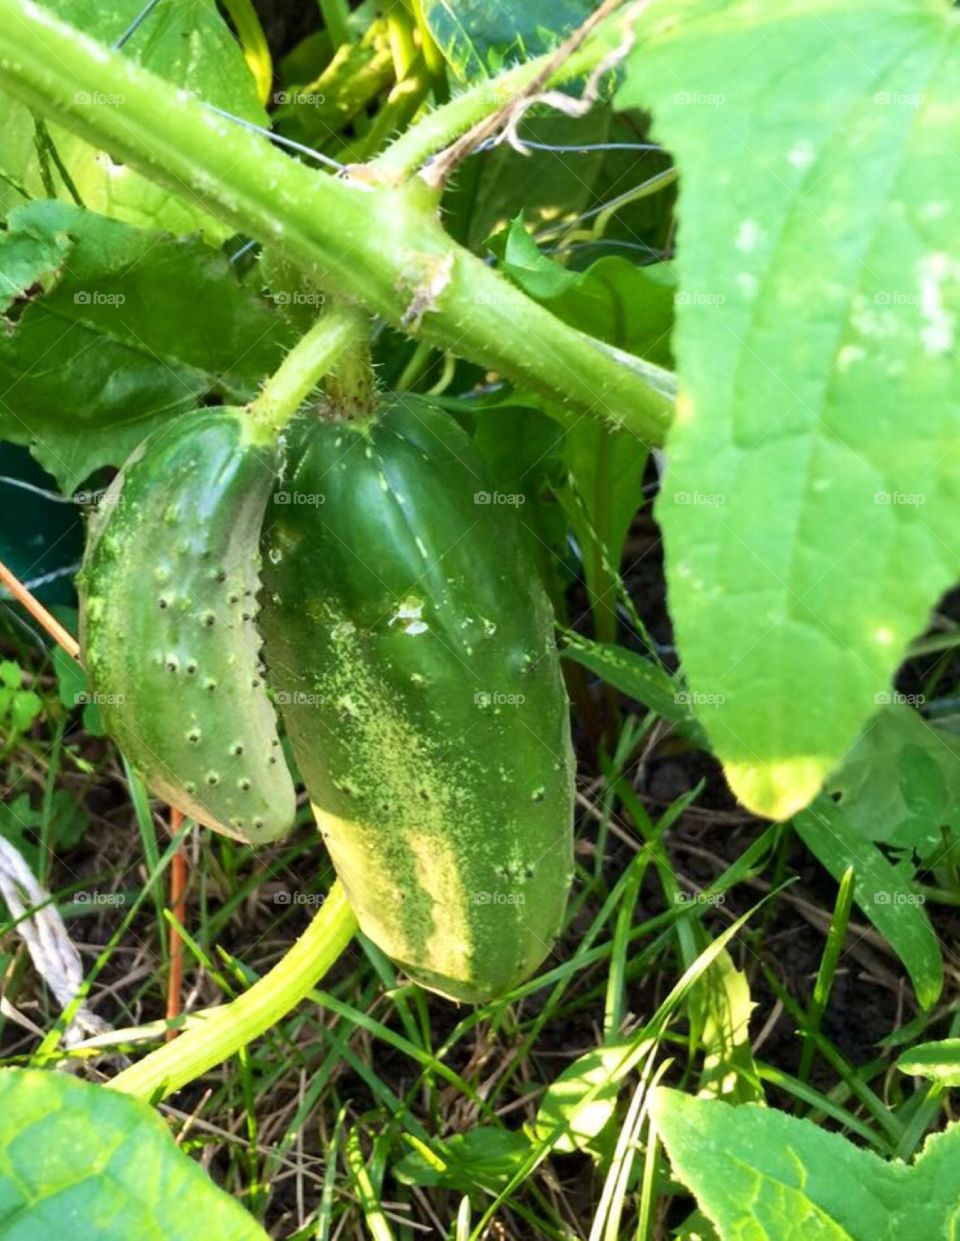 Cucumber pickles. Cucumber pickles growing on chicken wire fence , vertical growing.